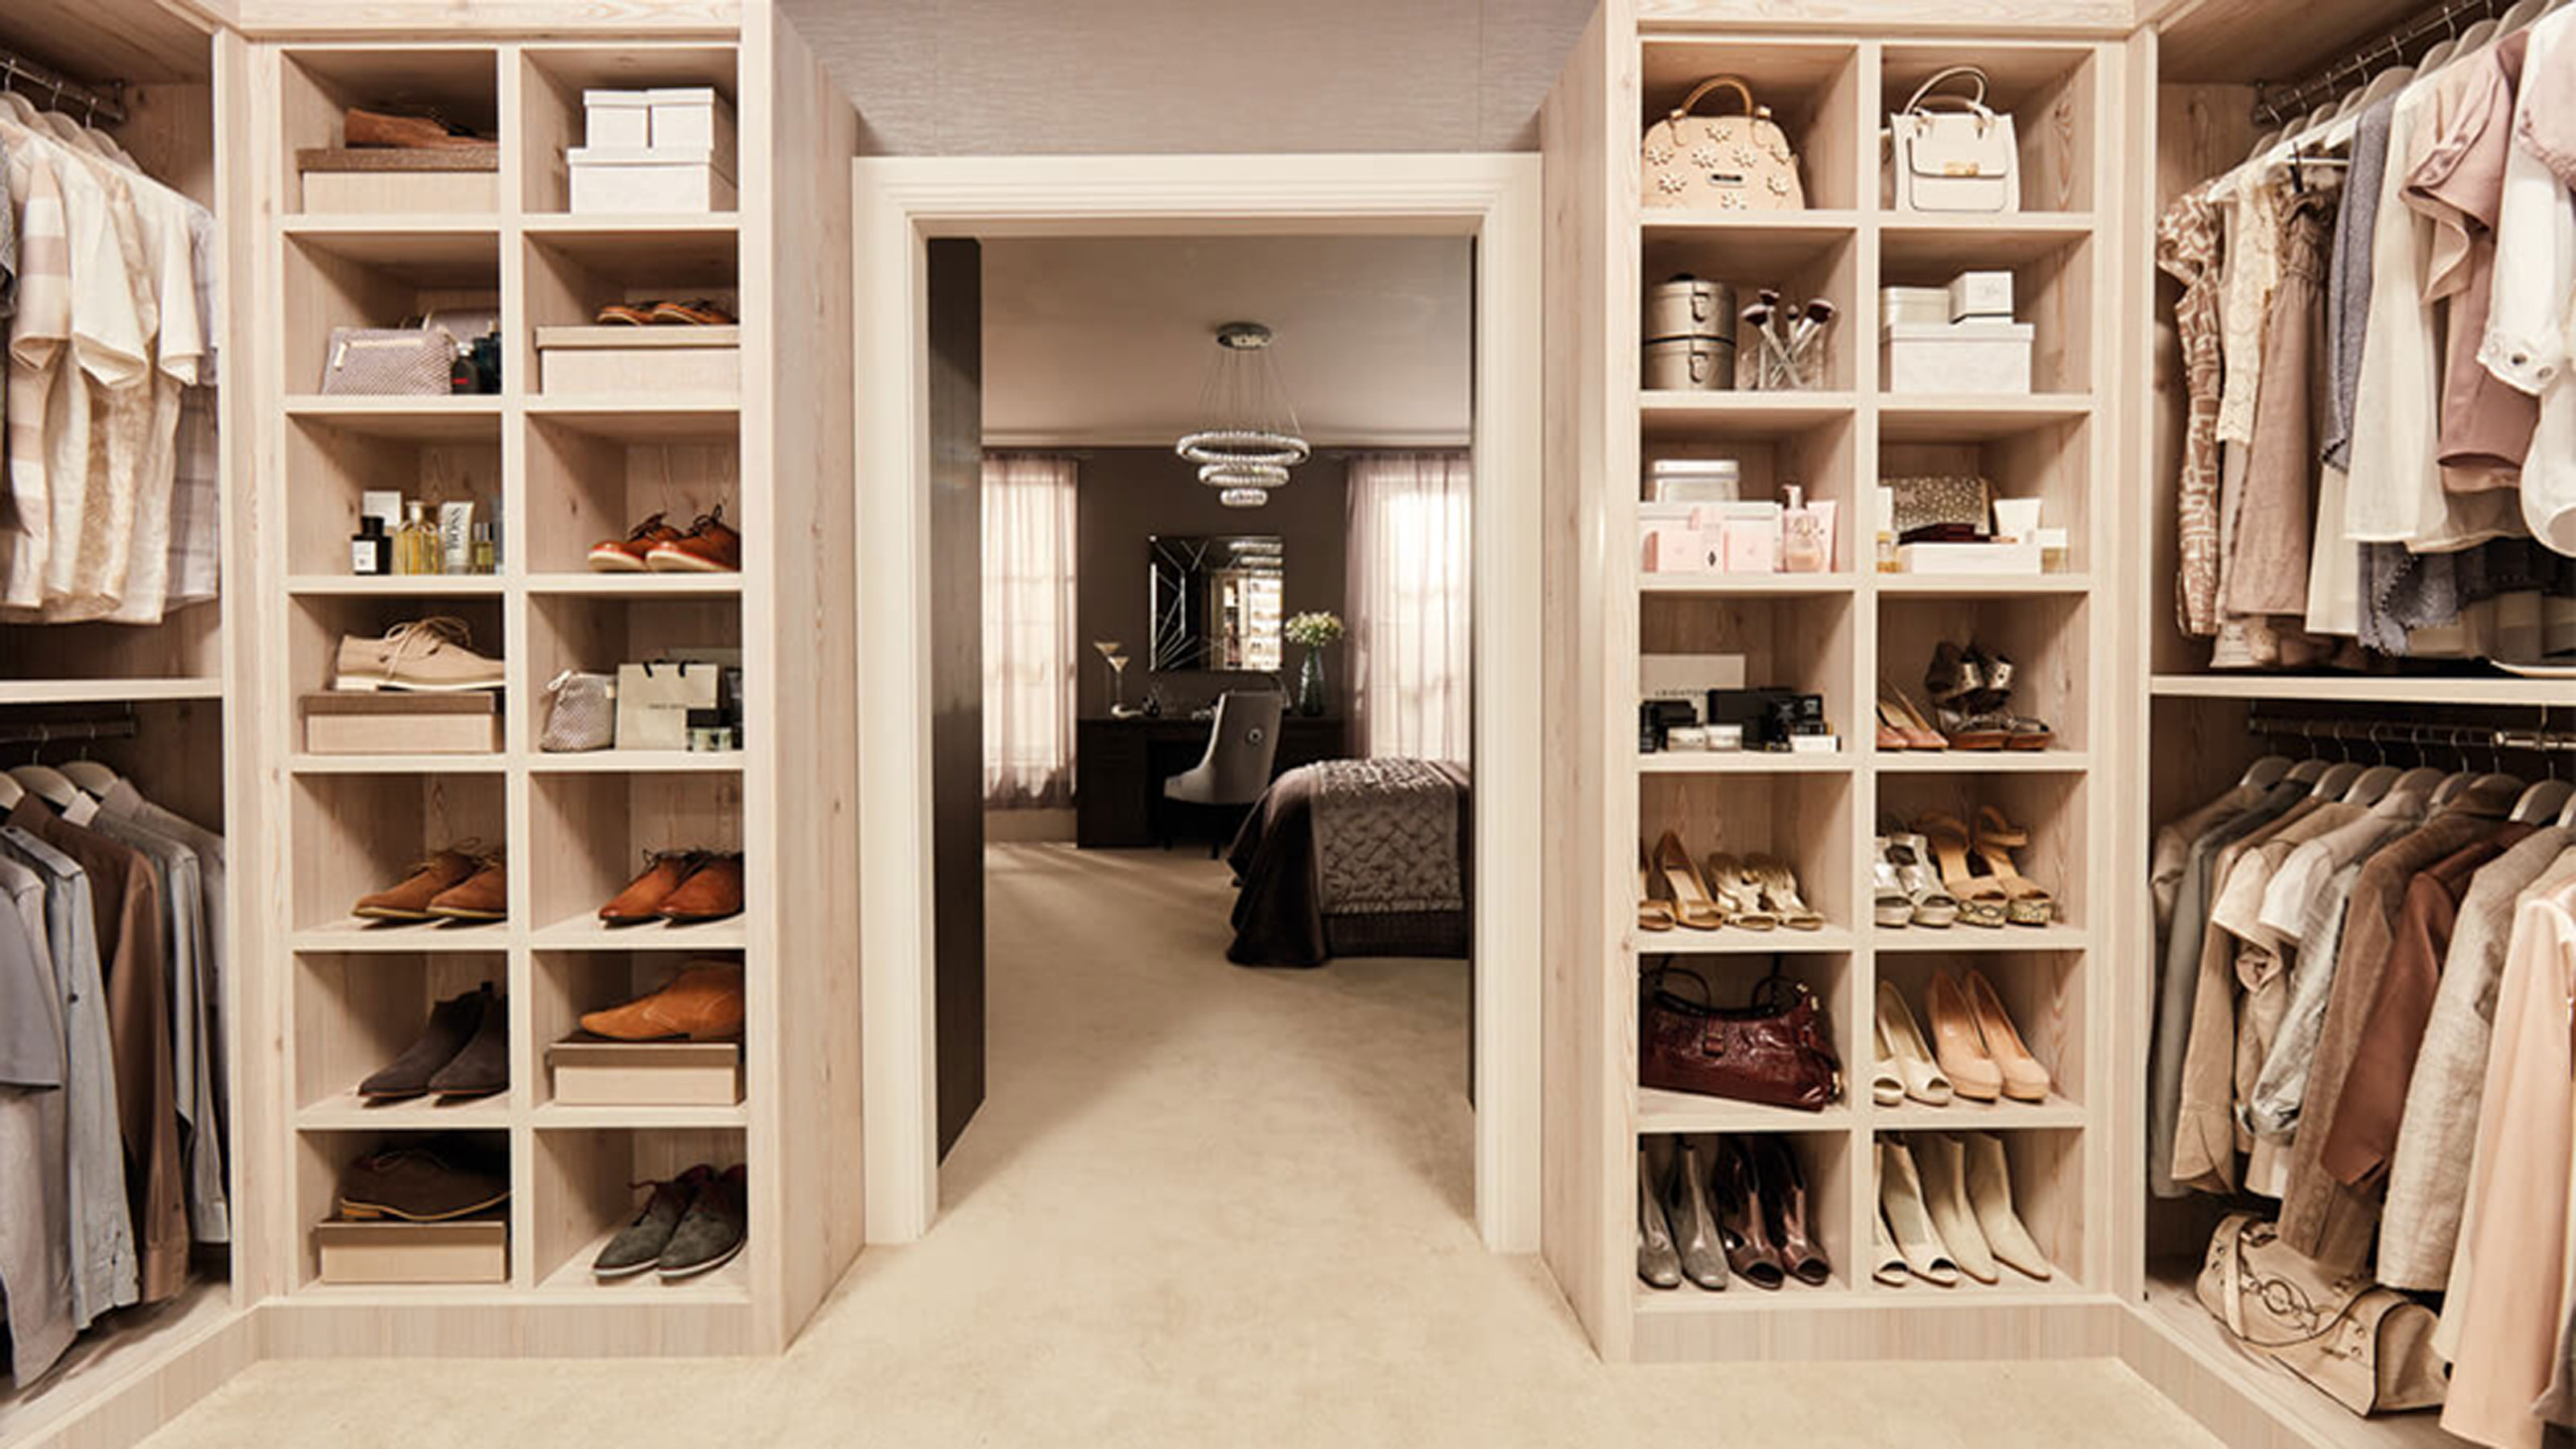 George Eliot Alvast juni How do you lay out a walk-in closet? Expert organizers advise 